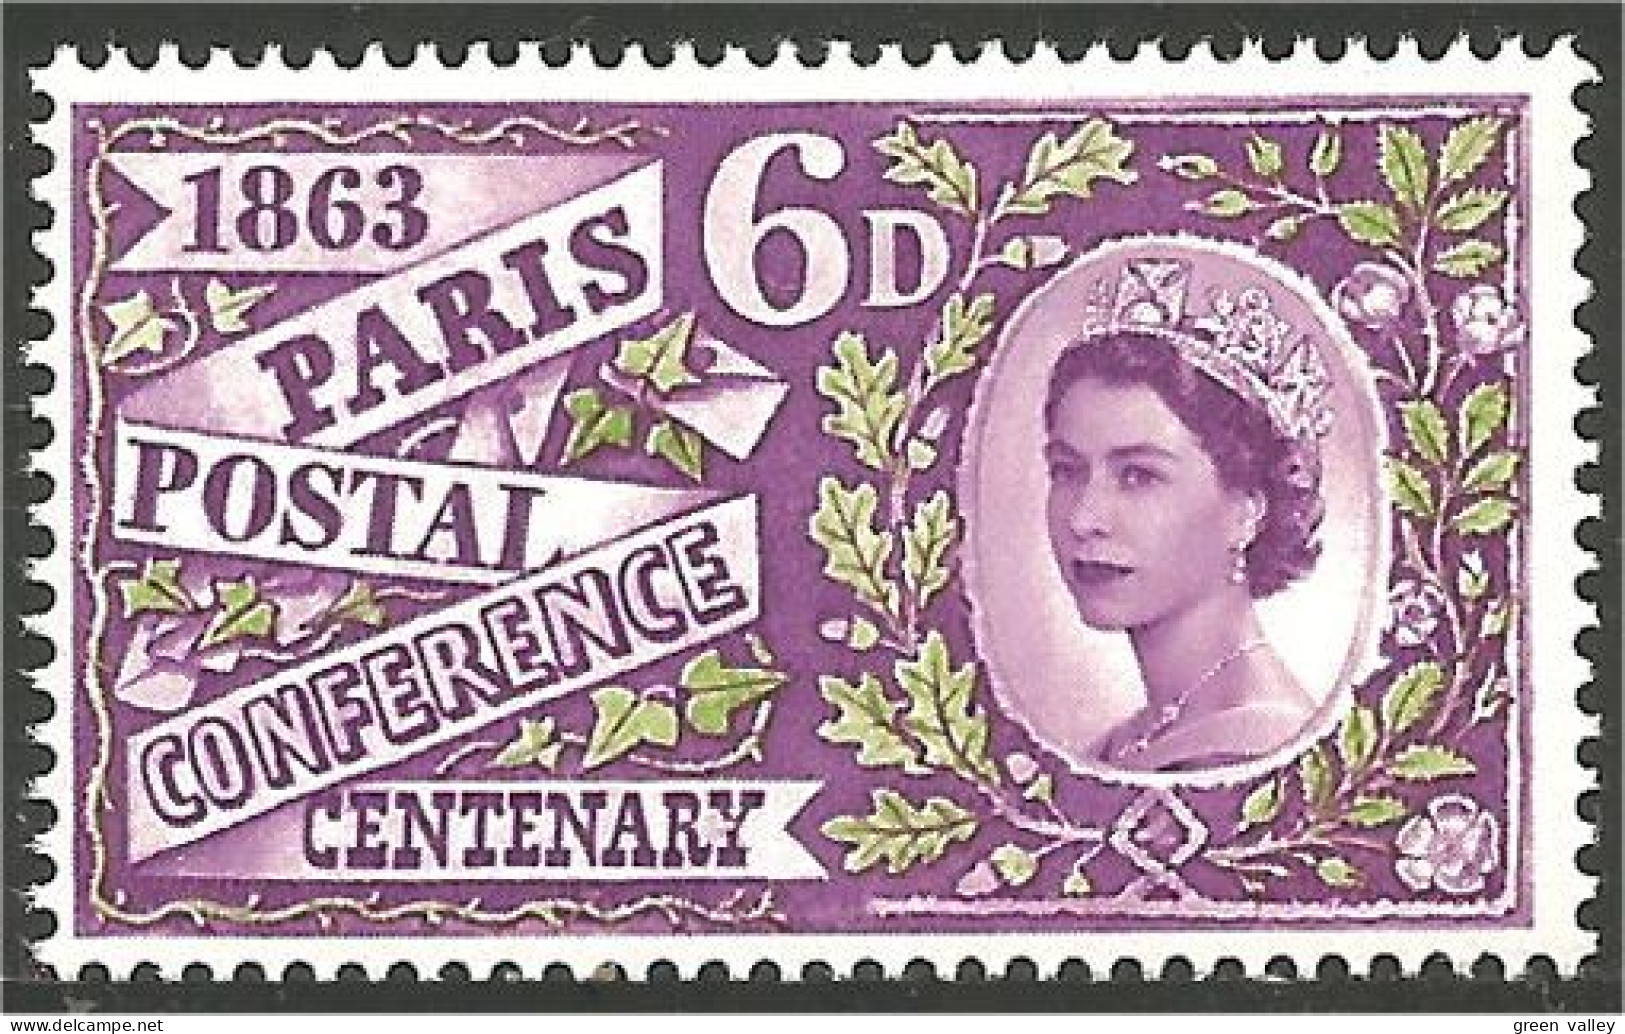 420 G-B 1963 Paris Postal Conference MNH ** Neuf SC (GB-2a) - Unused Stamps